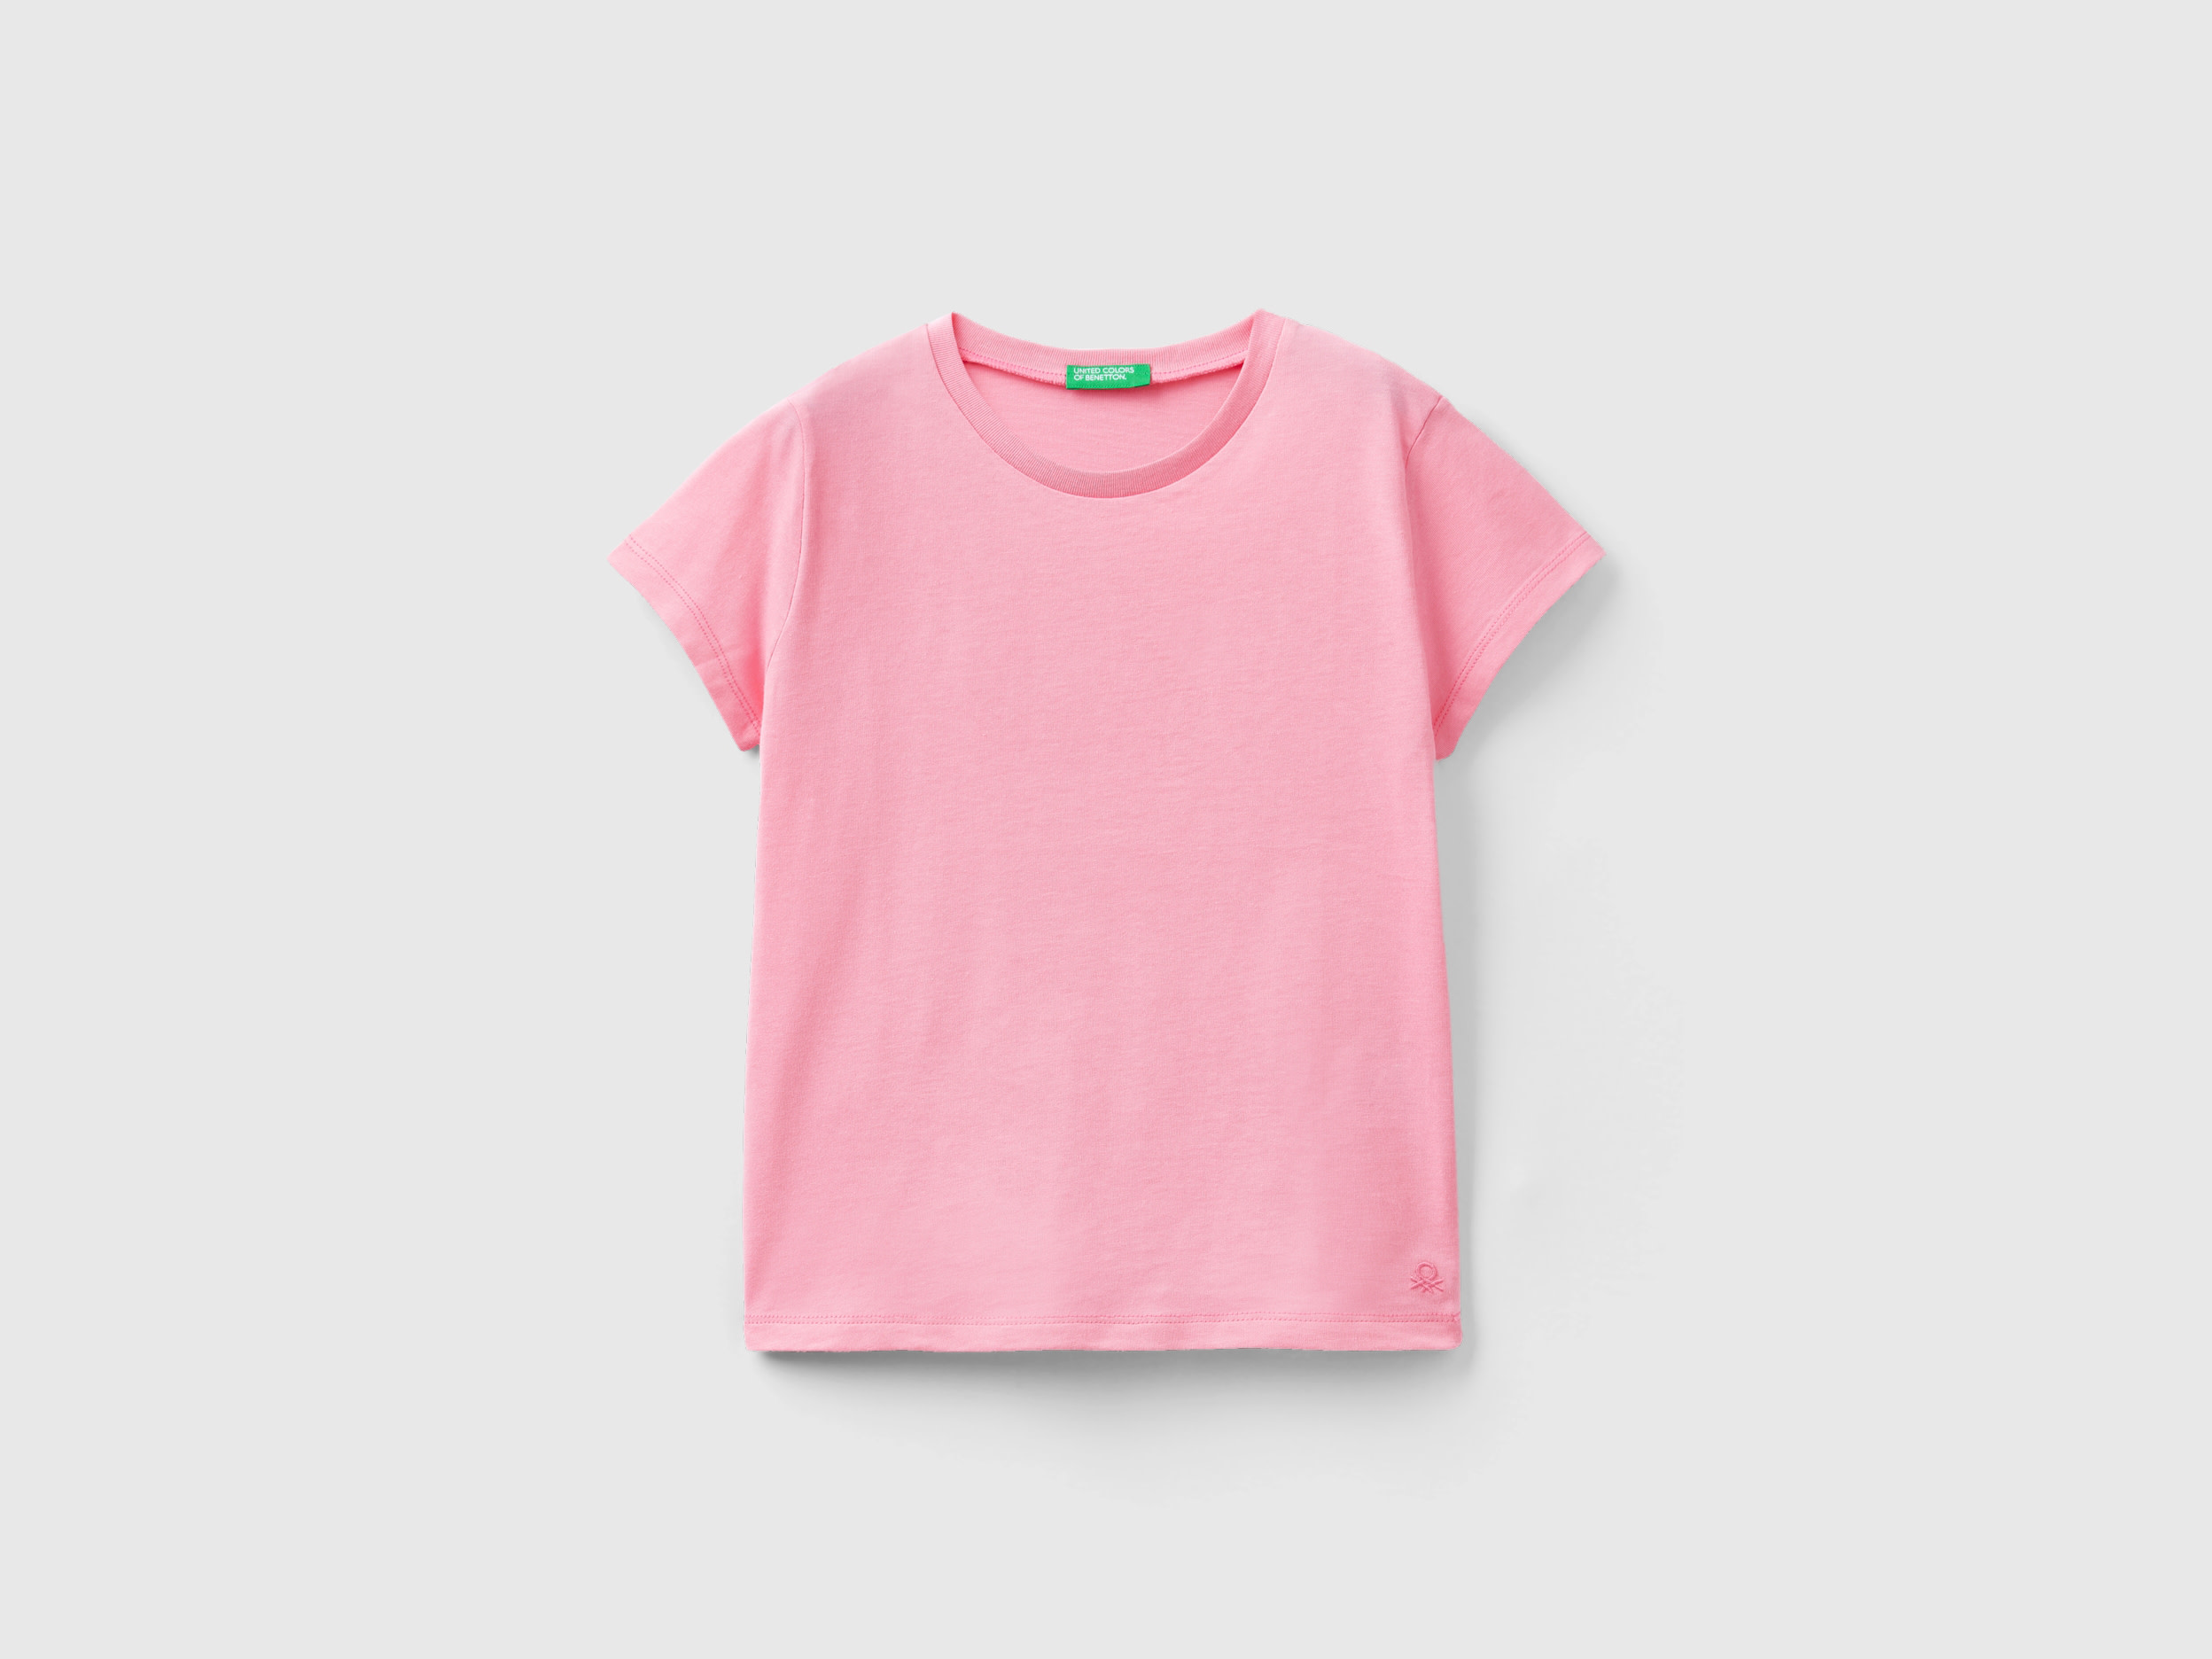 Image of Benetton, T-shirt In Pure Organic Cotton, size 3XL, Pink, Kids